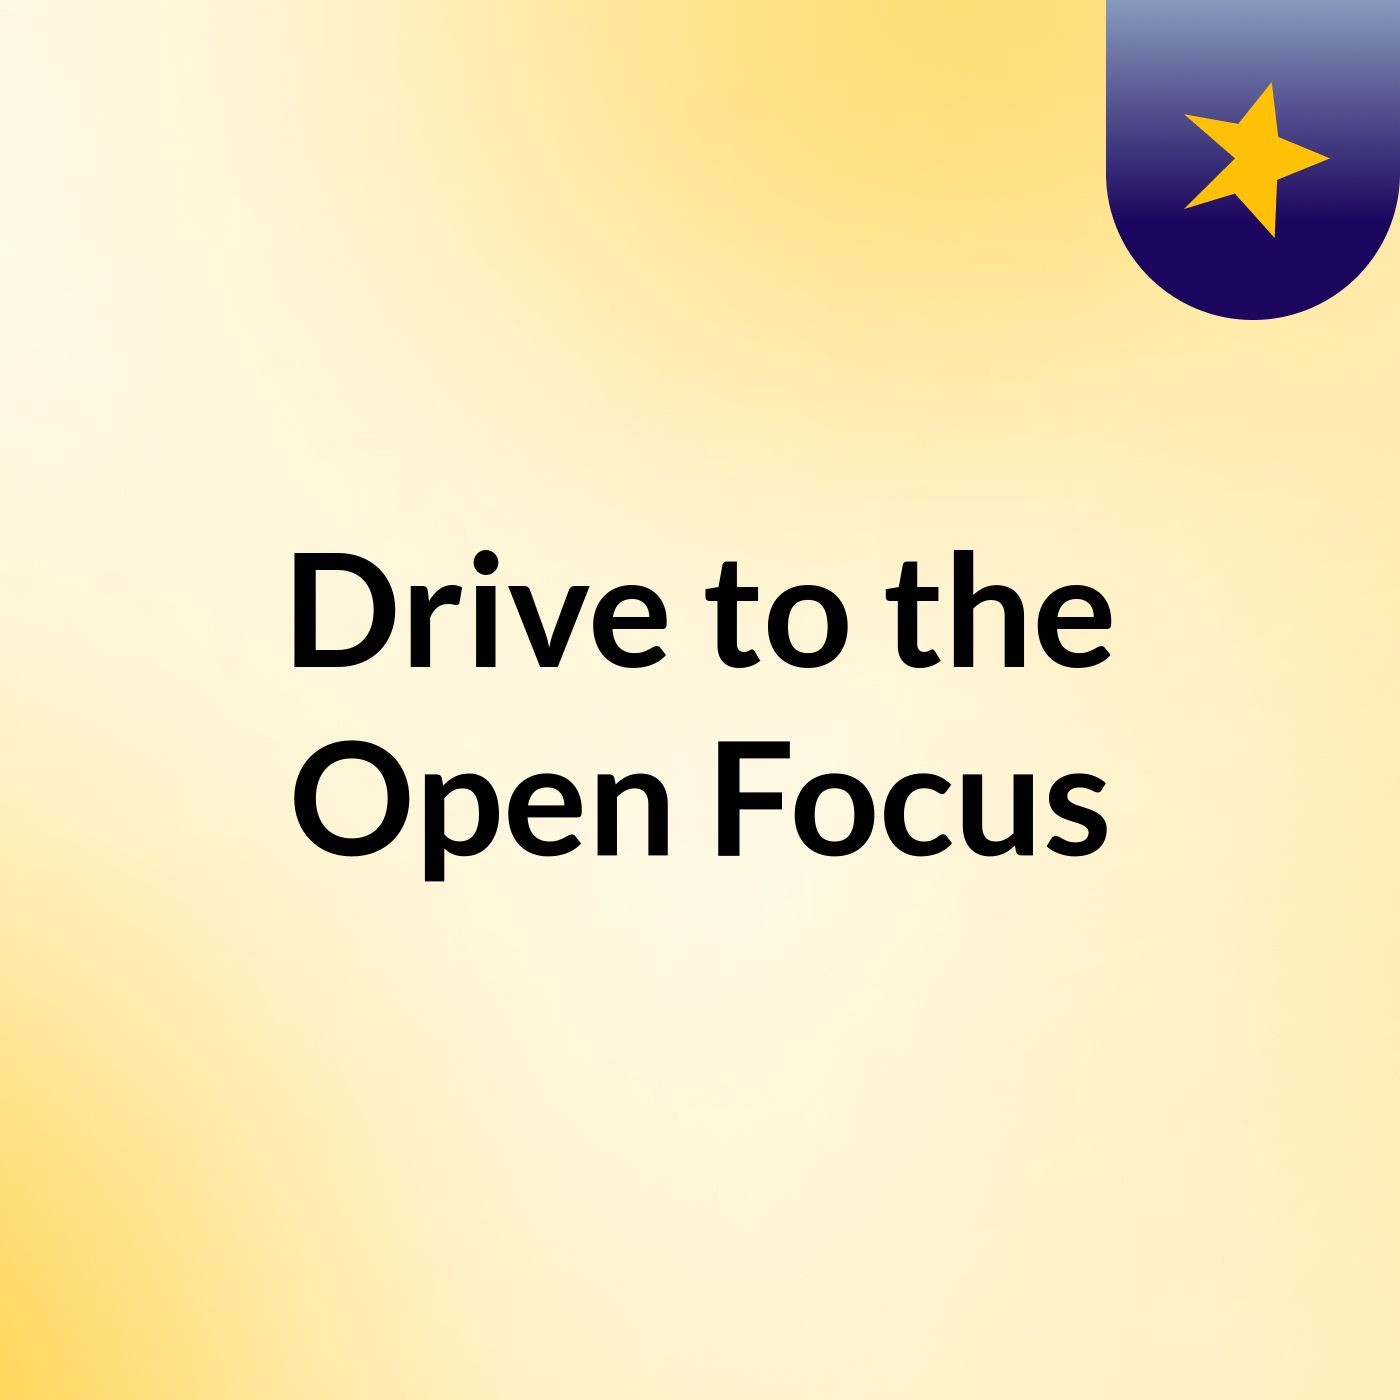 Drive to the Open Focus